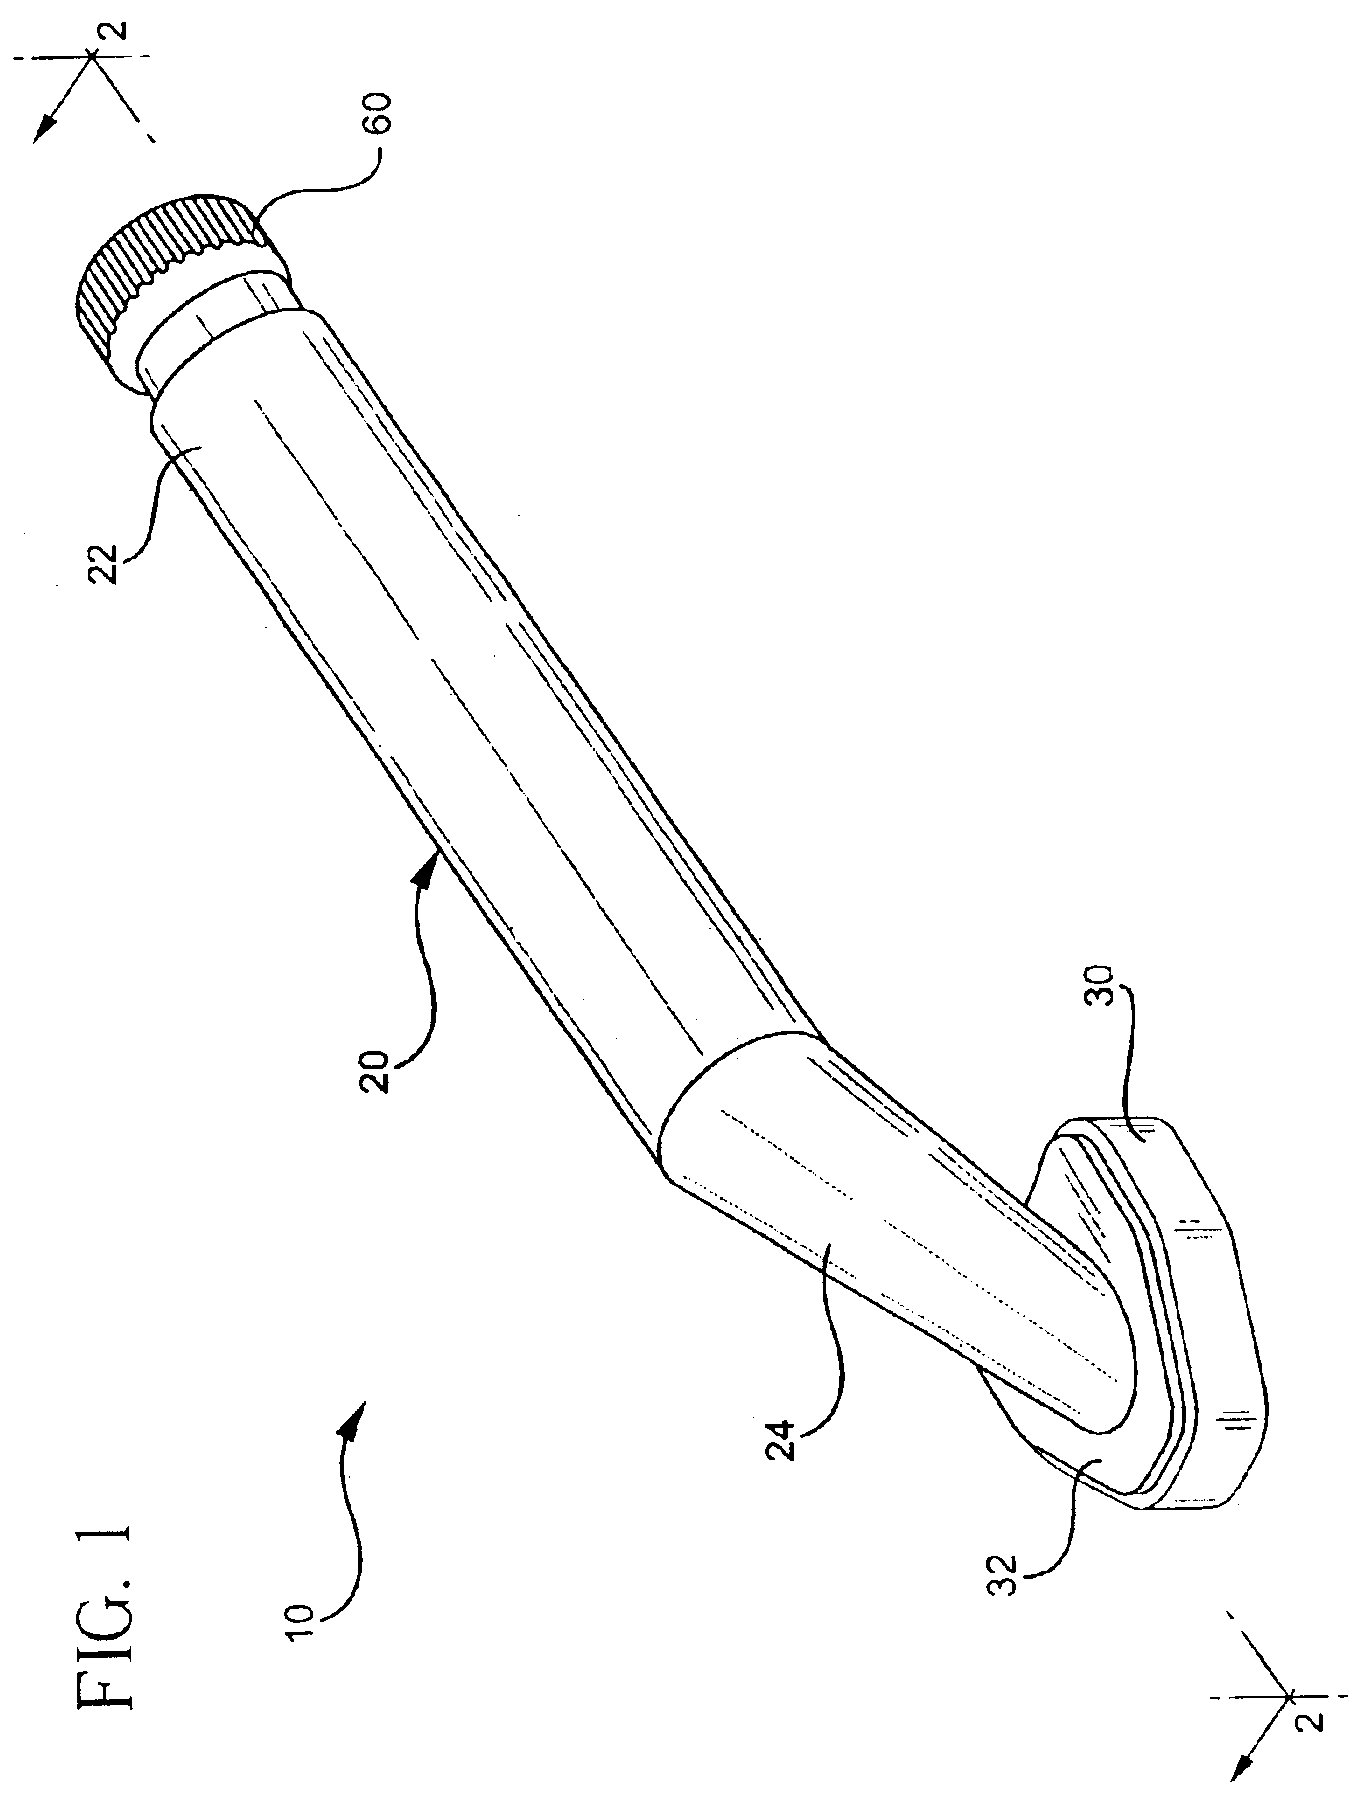 Patient preparatory applicator with a back plug activator